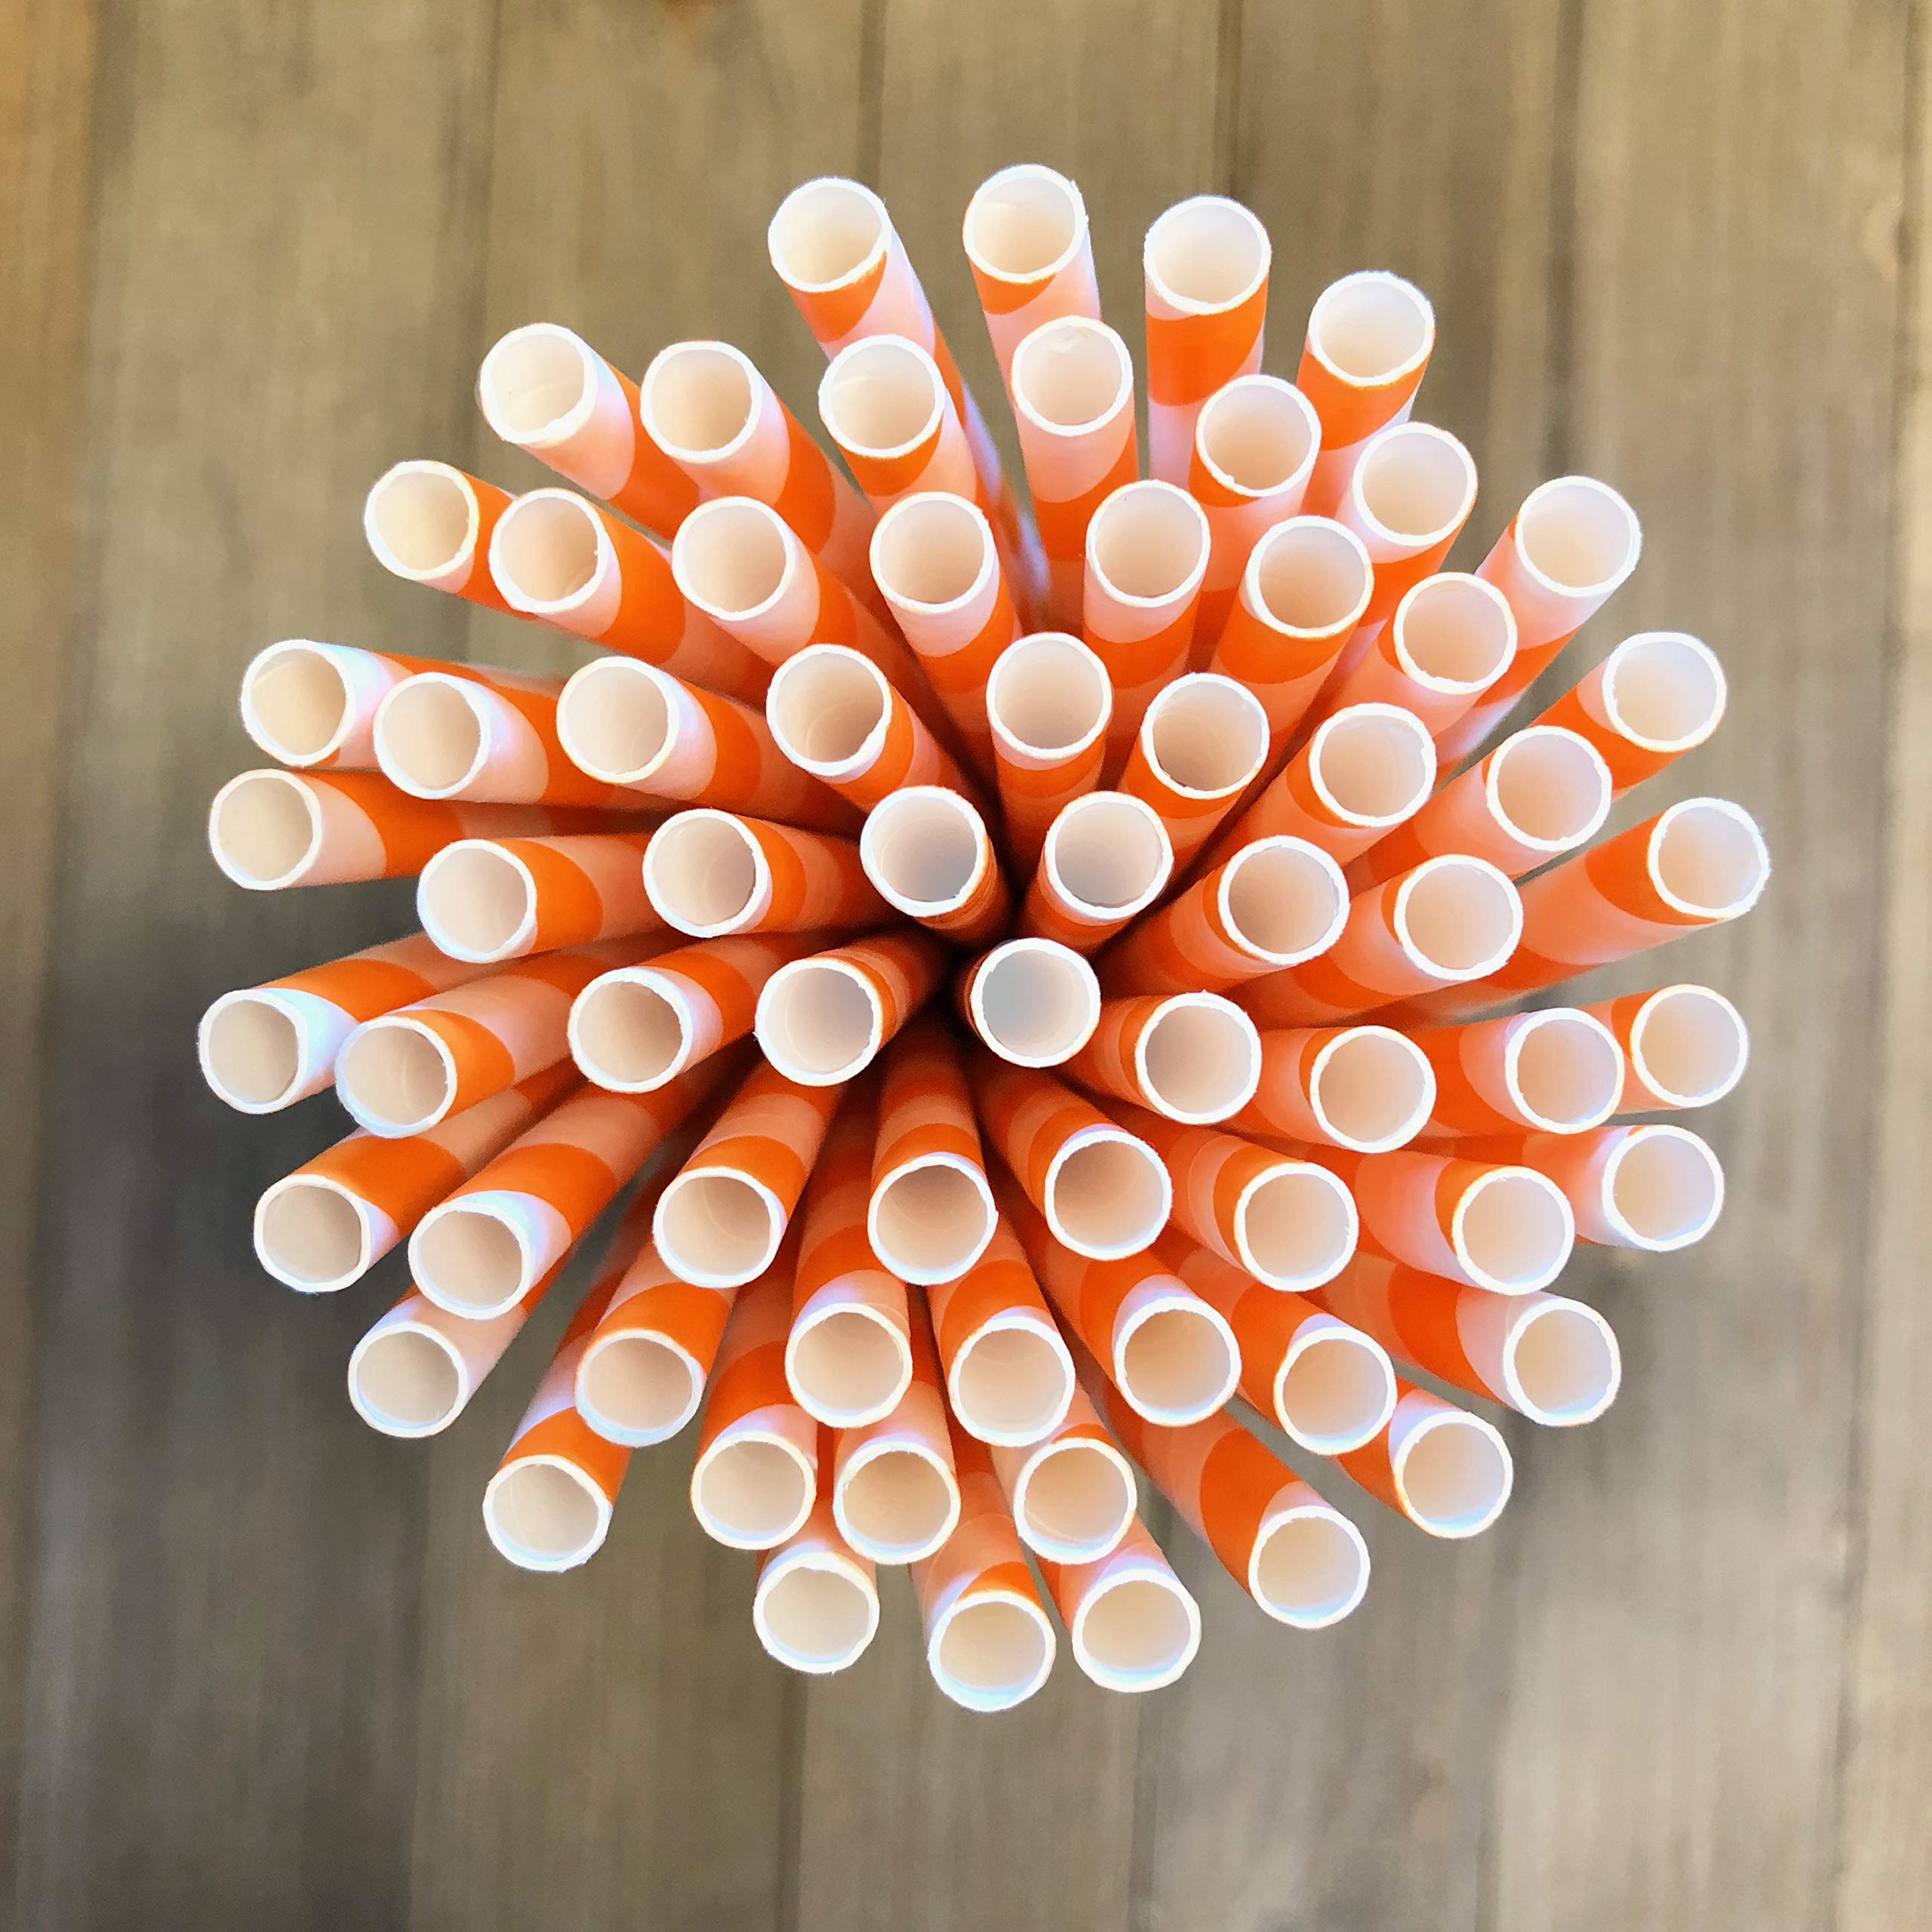 Striped Paper Straws - Party Supply - Orange and White - 7.75 Inches - 50 Pack - Outside the Box Papers Brand